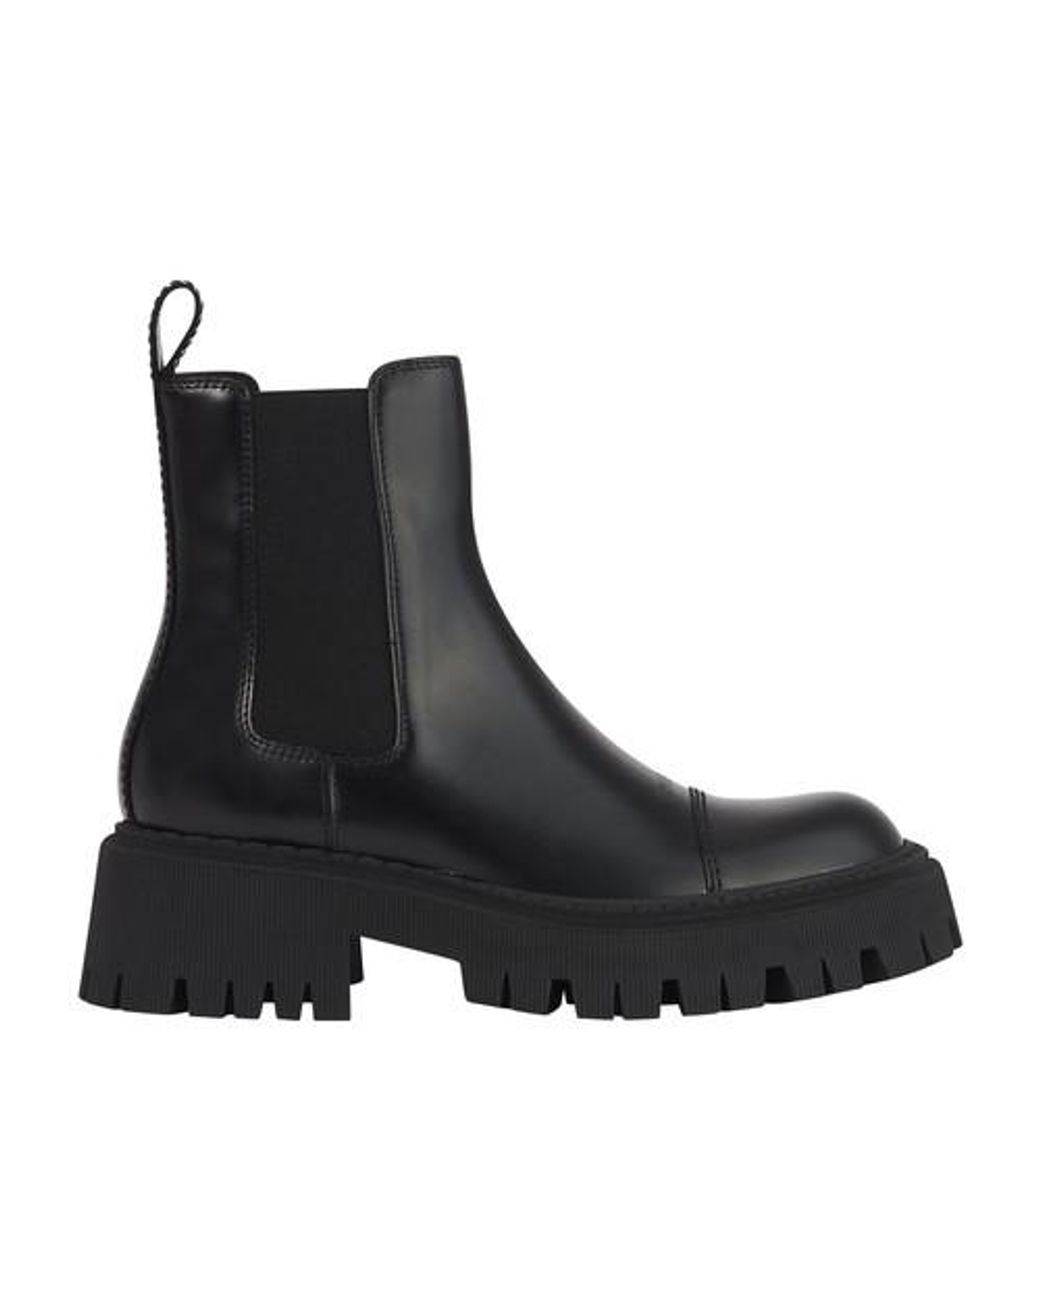 Balenciaga Tractor Boots in Black for Men - Lyst